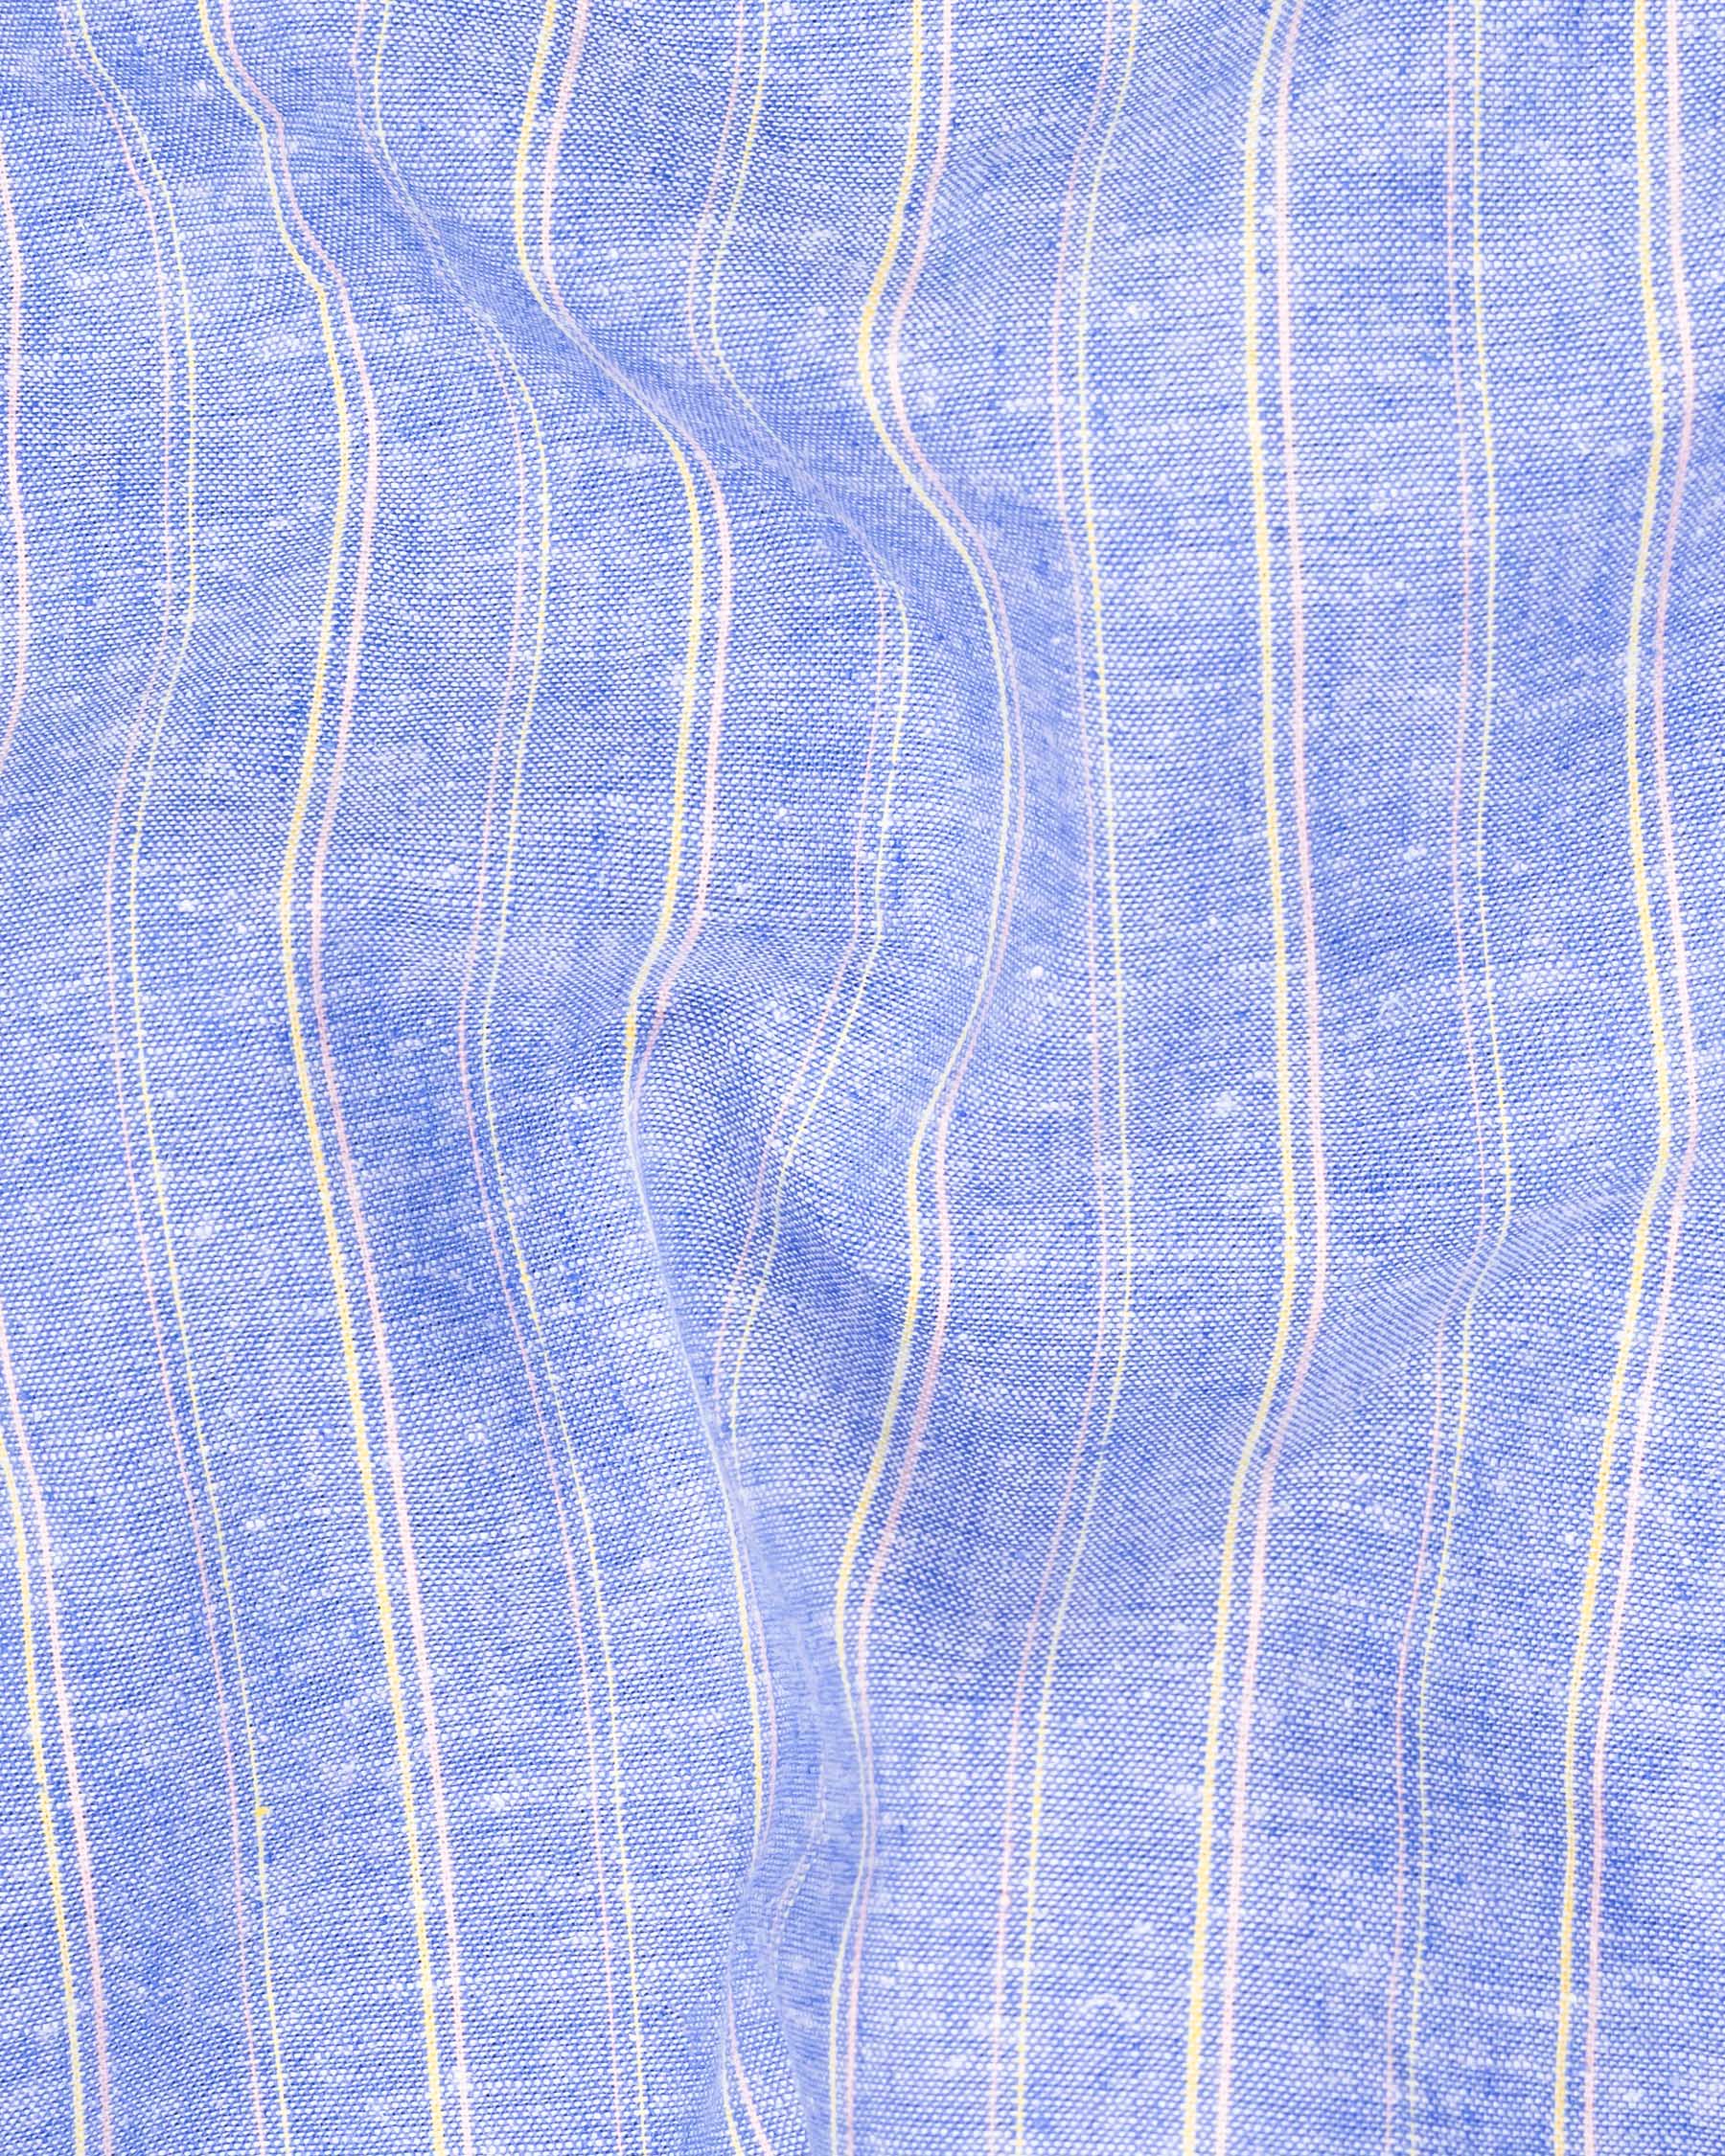 Amethyst Blue And White Striped Luxurious Linen Shirt 7120-CC-38,7120-CC-H-38,7120-CC-39,7120-CC-H-39,7120-CC-40,7120-CC-H-40,7120-CC-42,7120-CC-H-42,7120-CC-44,7120-CC-H-44,7120-CC-46,7120-CC-H-46,7120-CC-48,7120-CC-H-48,7120-CC-50,7120-CC-H-50,7120-CC-52,7120-CC-H-52